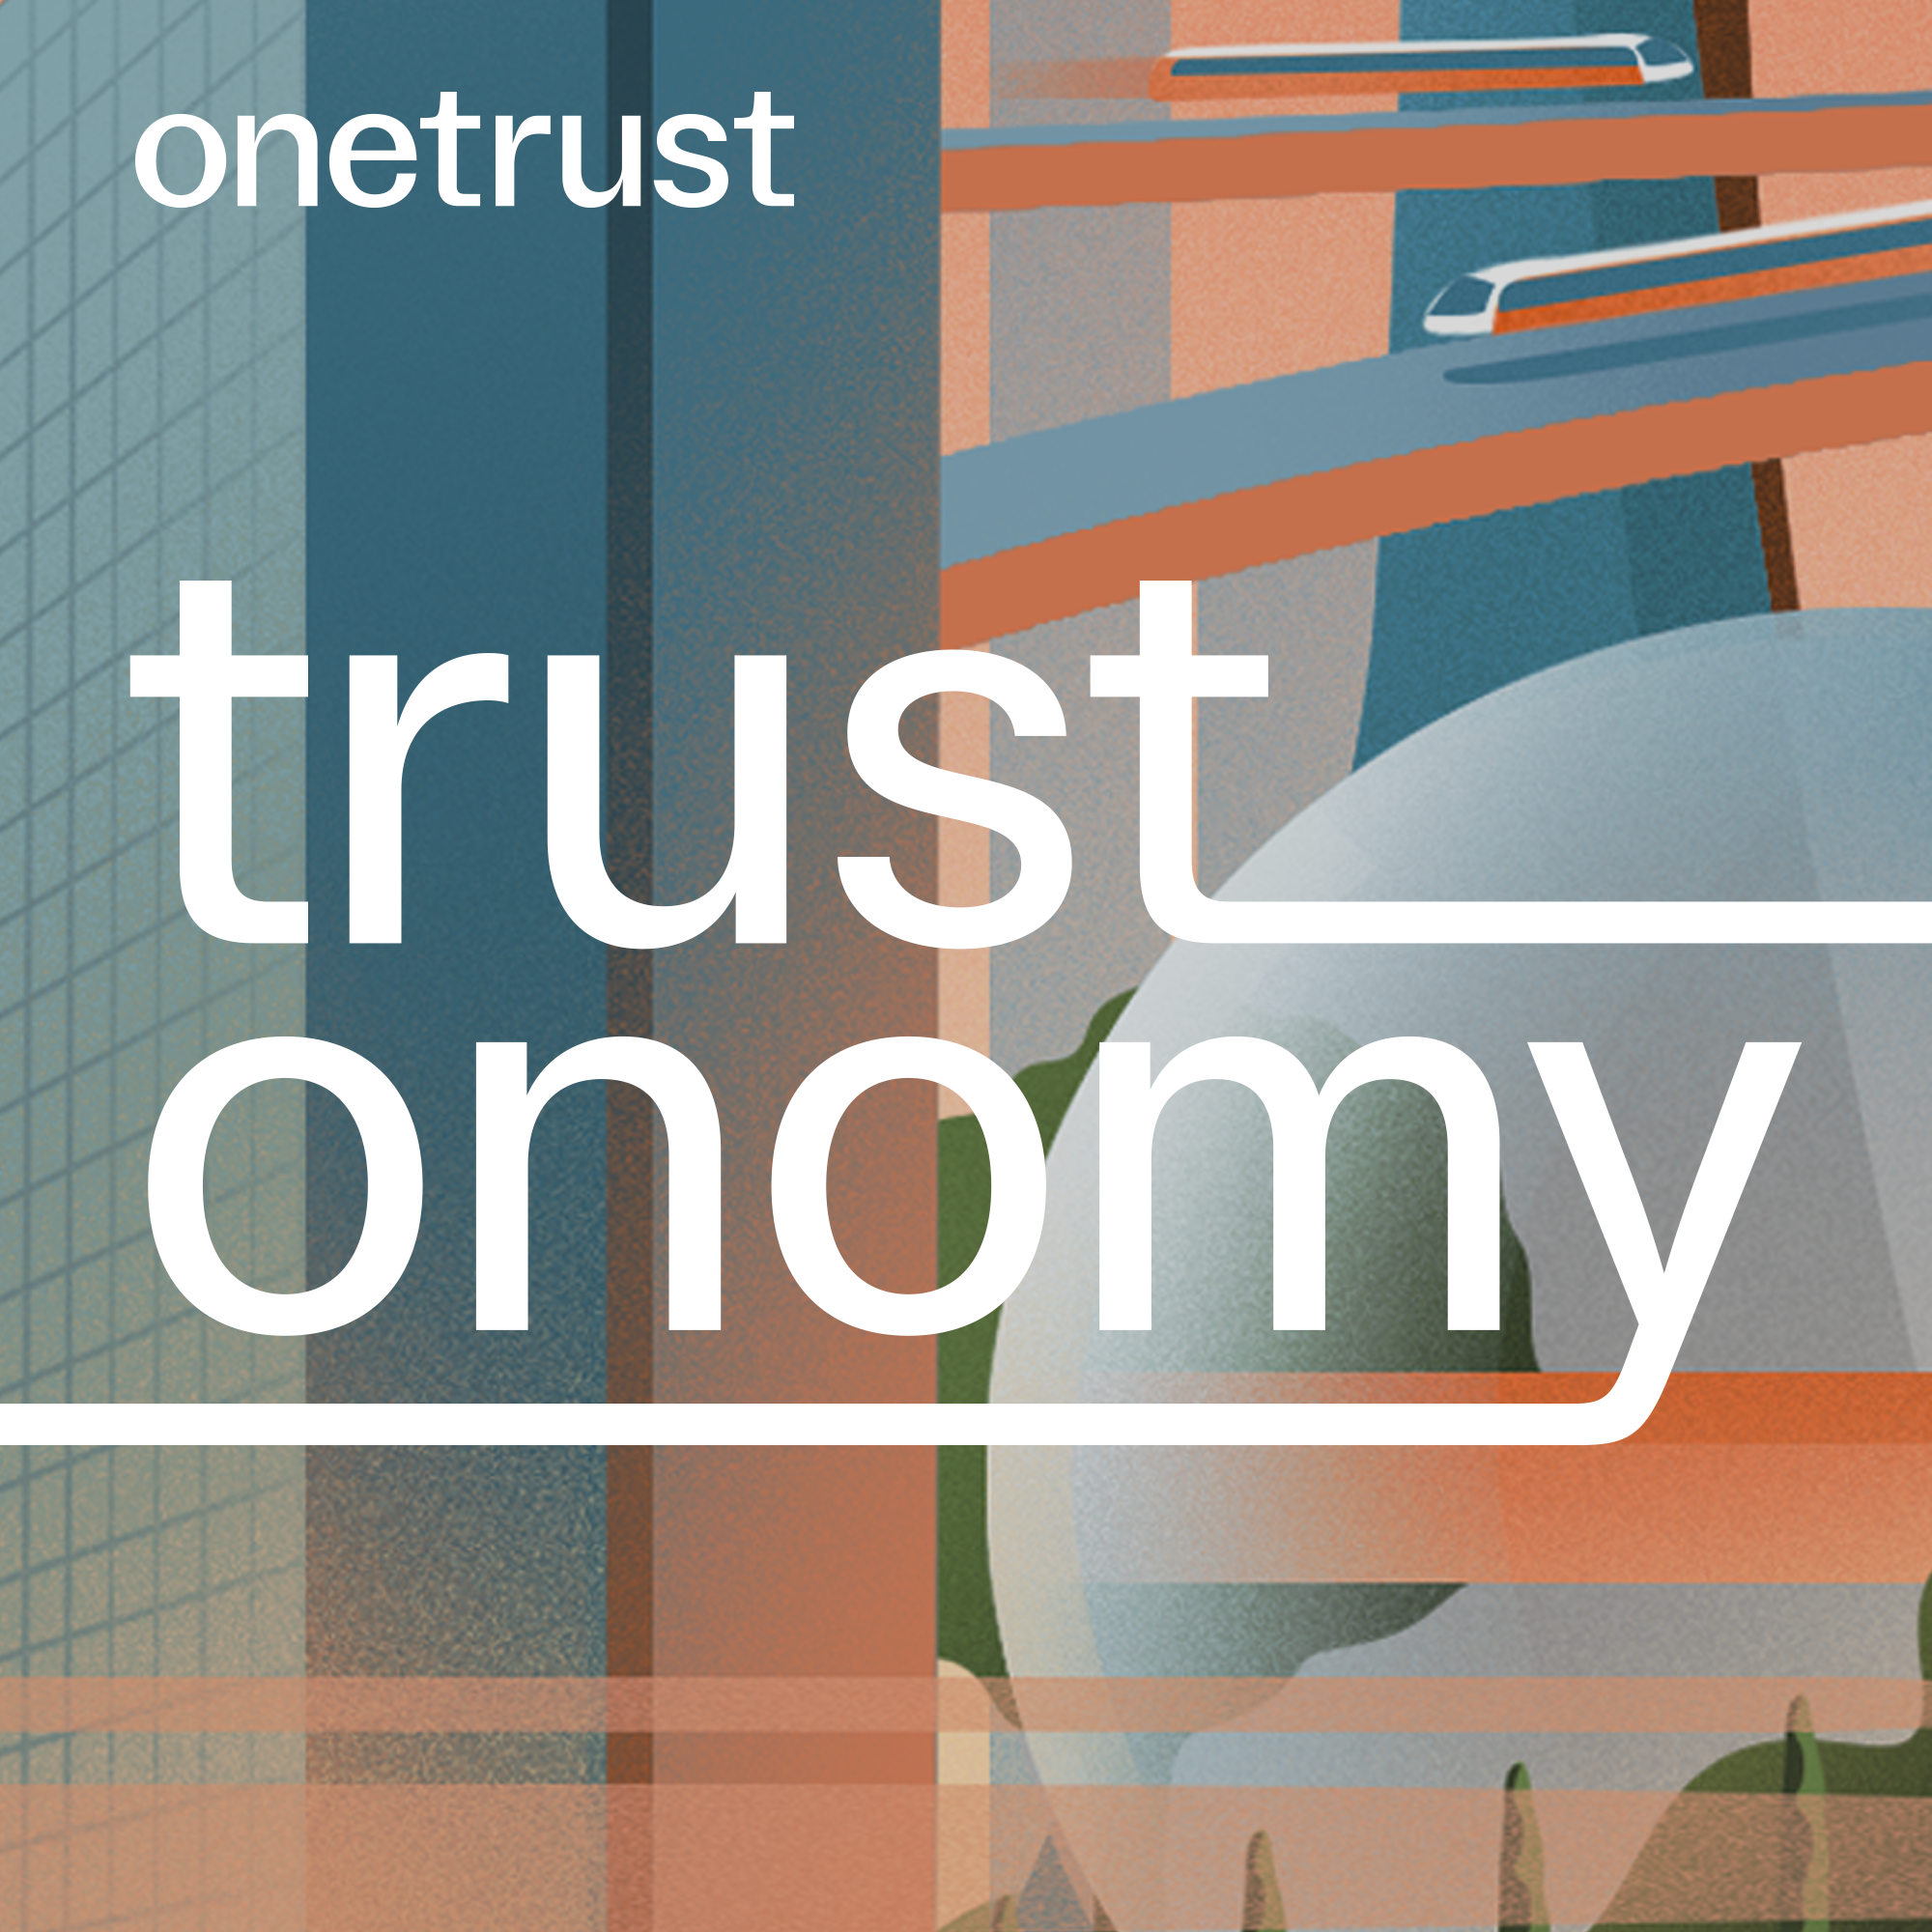 Illustration of a futuristic city with skyscrapers and maglev trains in an orange and blue palette in the background with the OneTrust and Trustonomy logos overlaid on top.